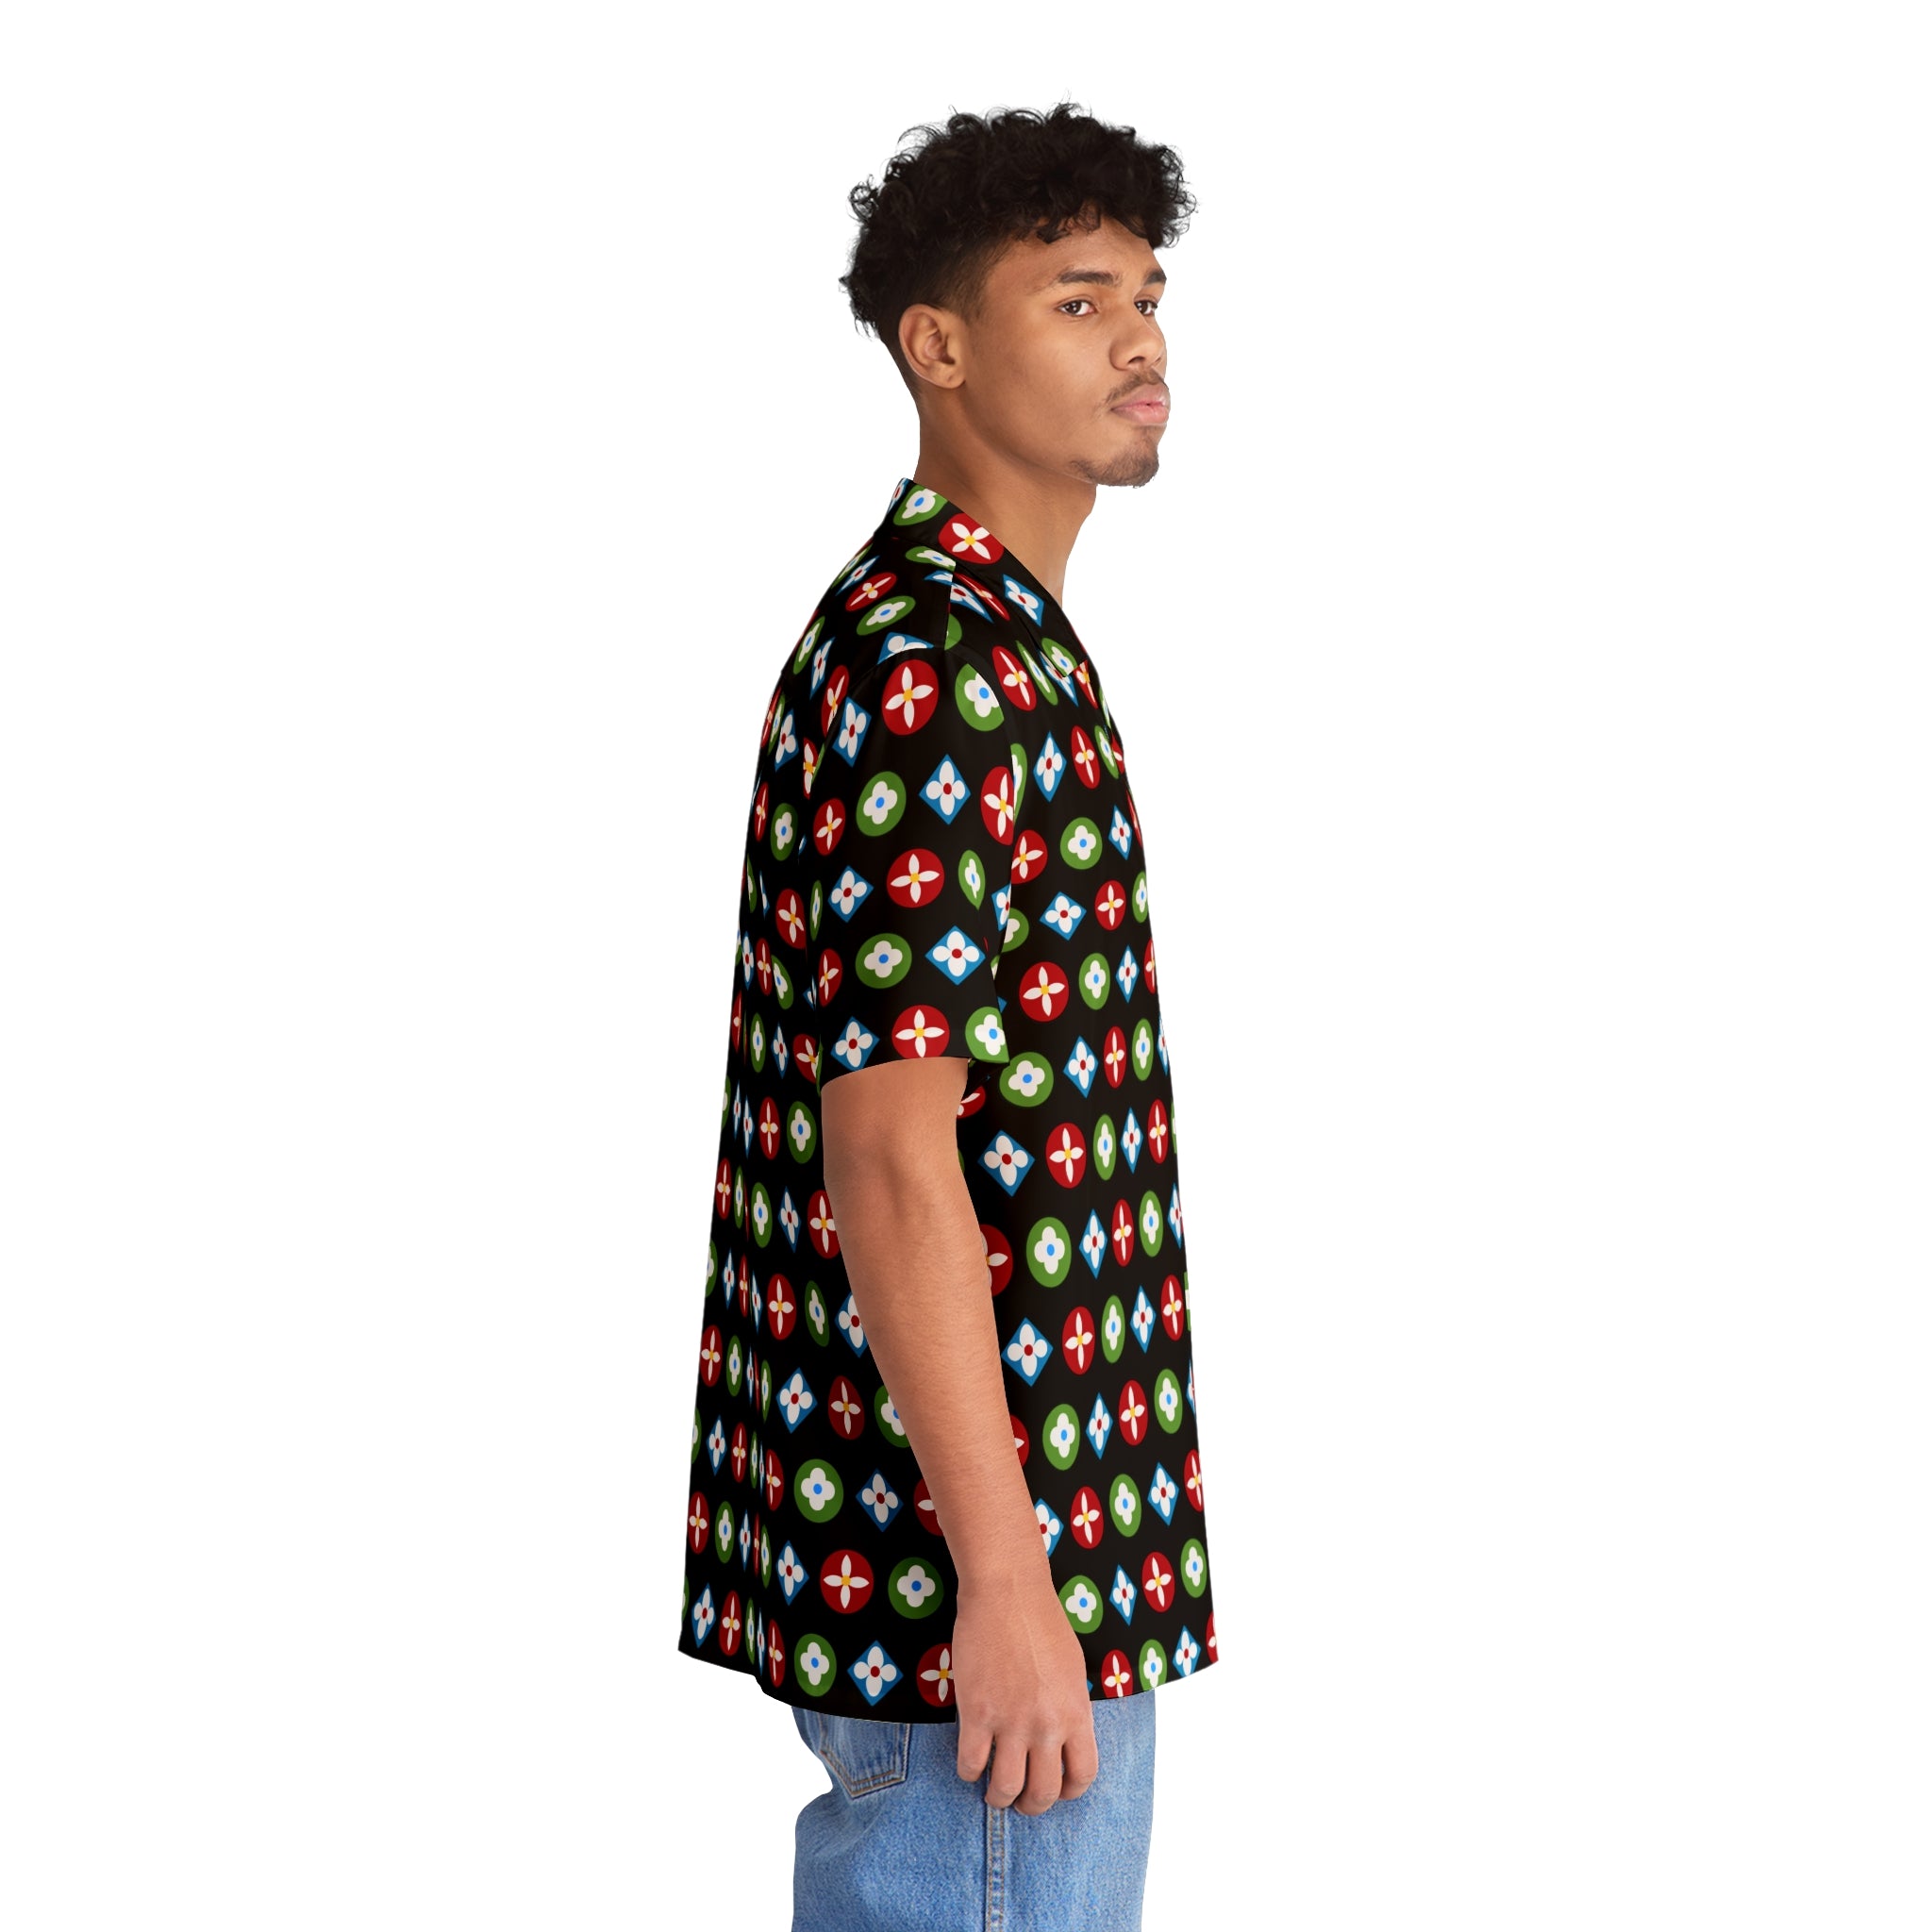  Groove Collection Trilogy of Icons Pattern (Red, Green, Blue) Black Unisex Gender Neutral Button Up Shirt, Hawaiian Shirt Men's Shirts